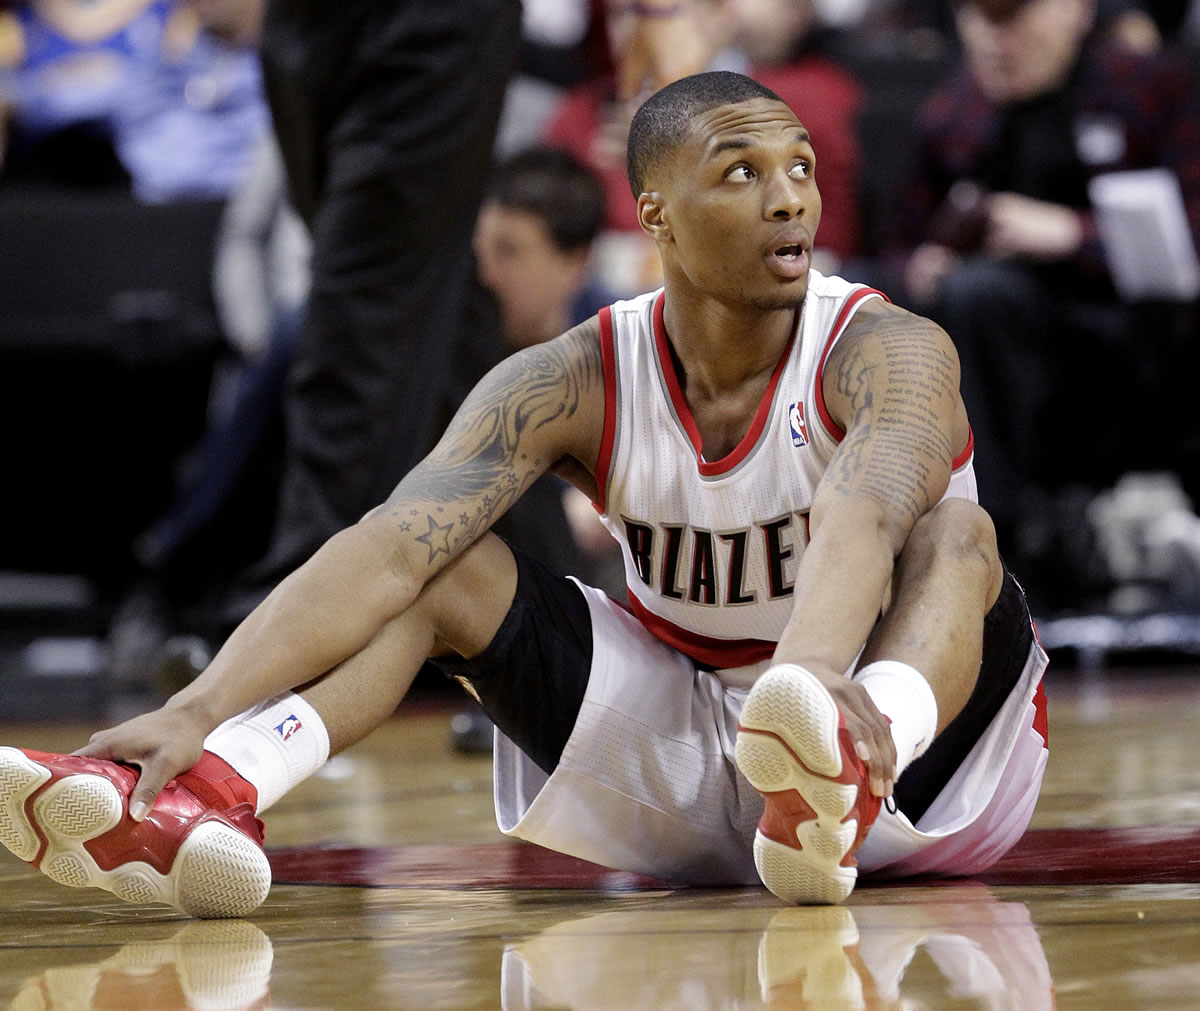 Don Ryan/The Associated Press
Portland Trail Blazers guard Damian Lillard sits on the floor after losing the ball during the second half of an basketball game  against the Golden.